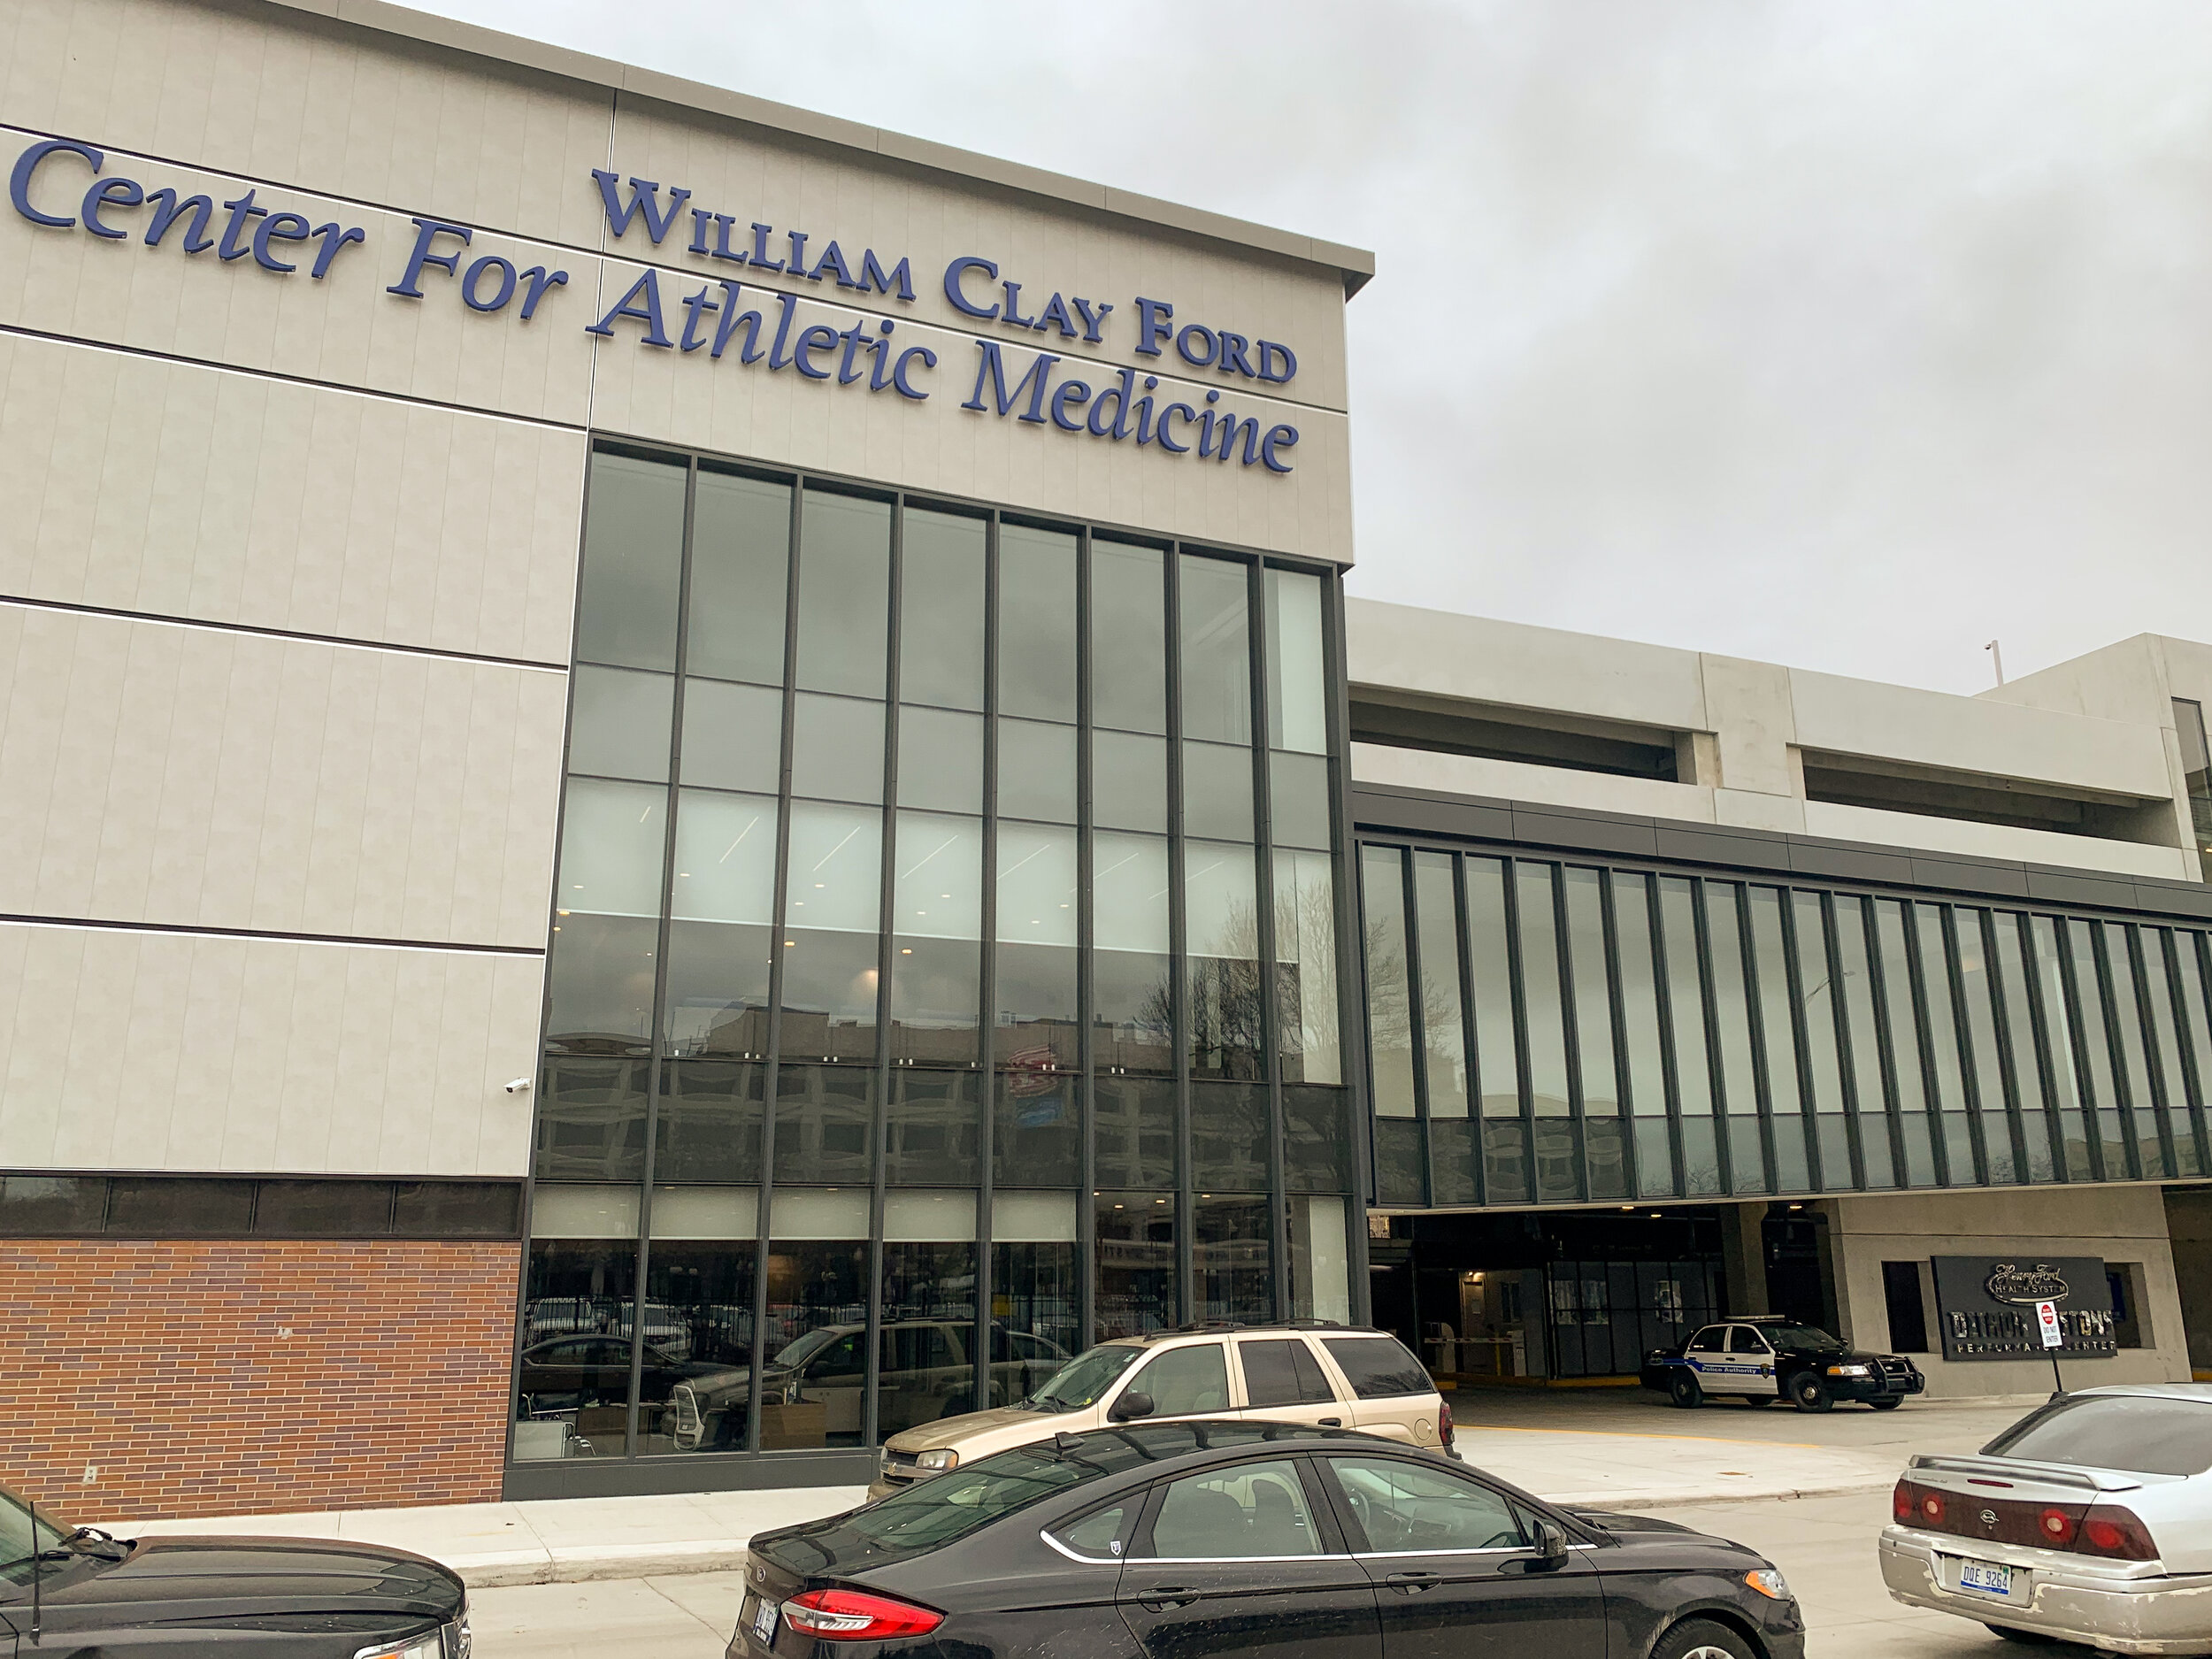 The-William-Clay-ford-center-for-athletic-medicine-02